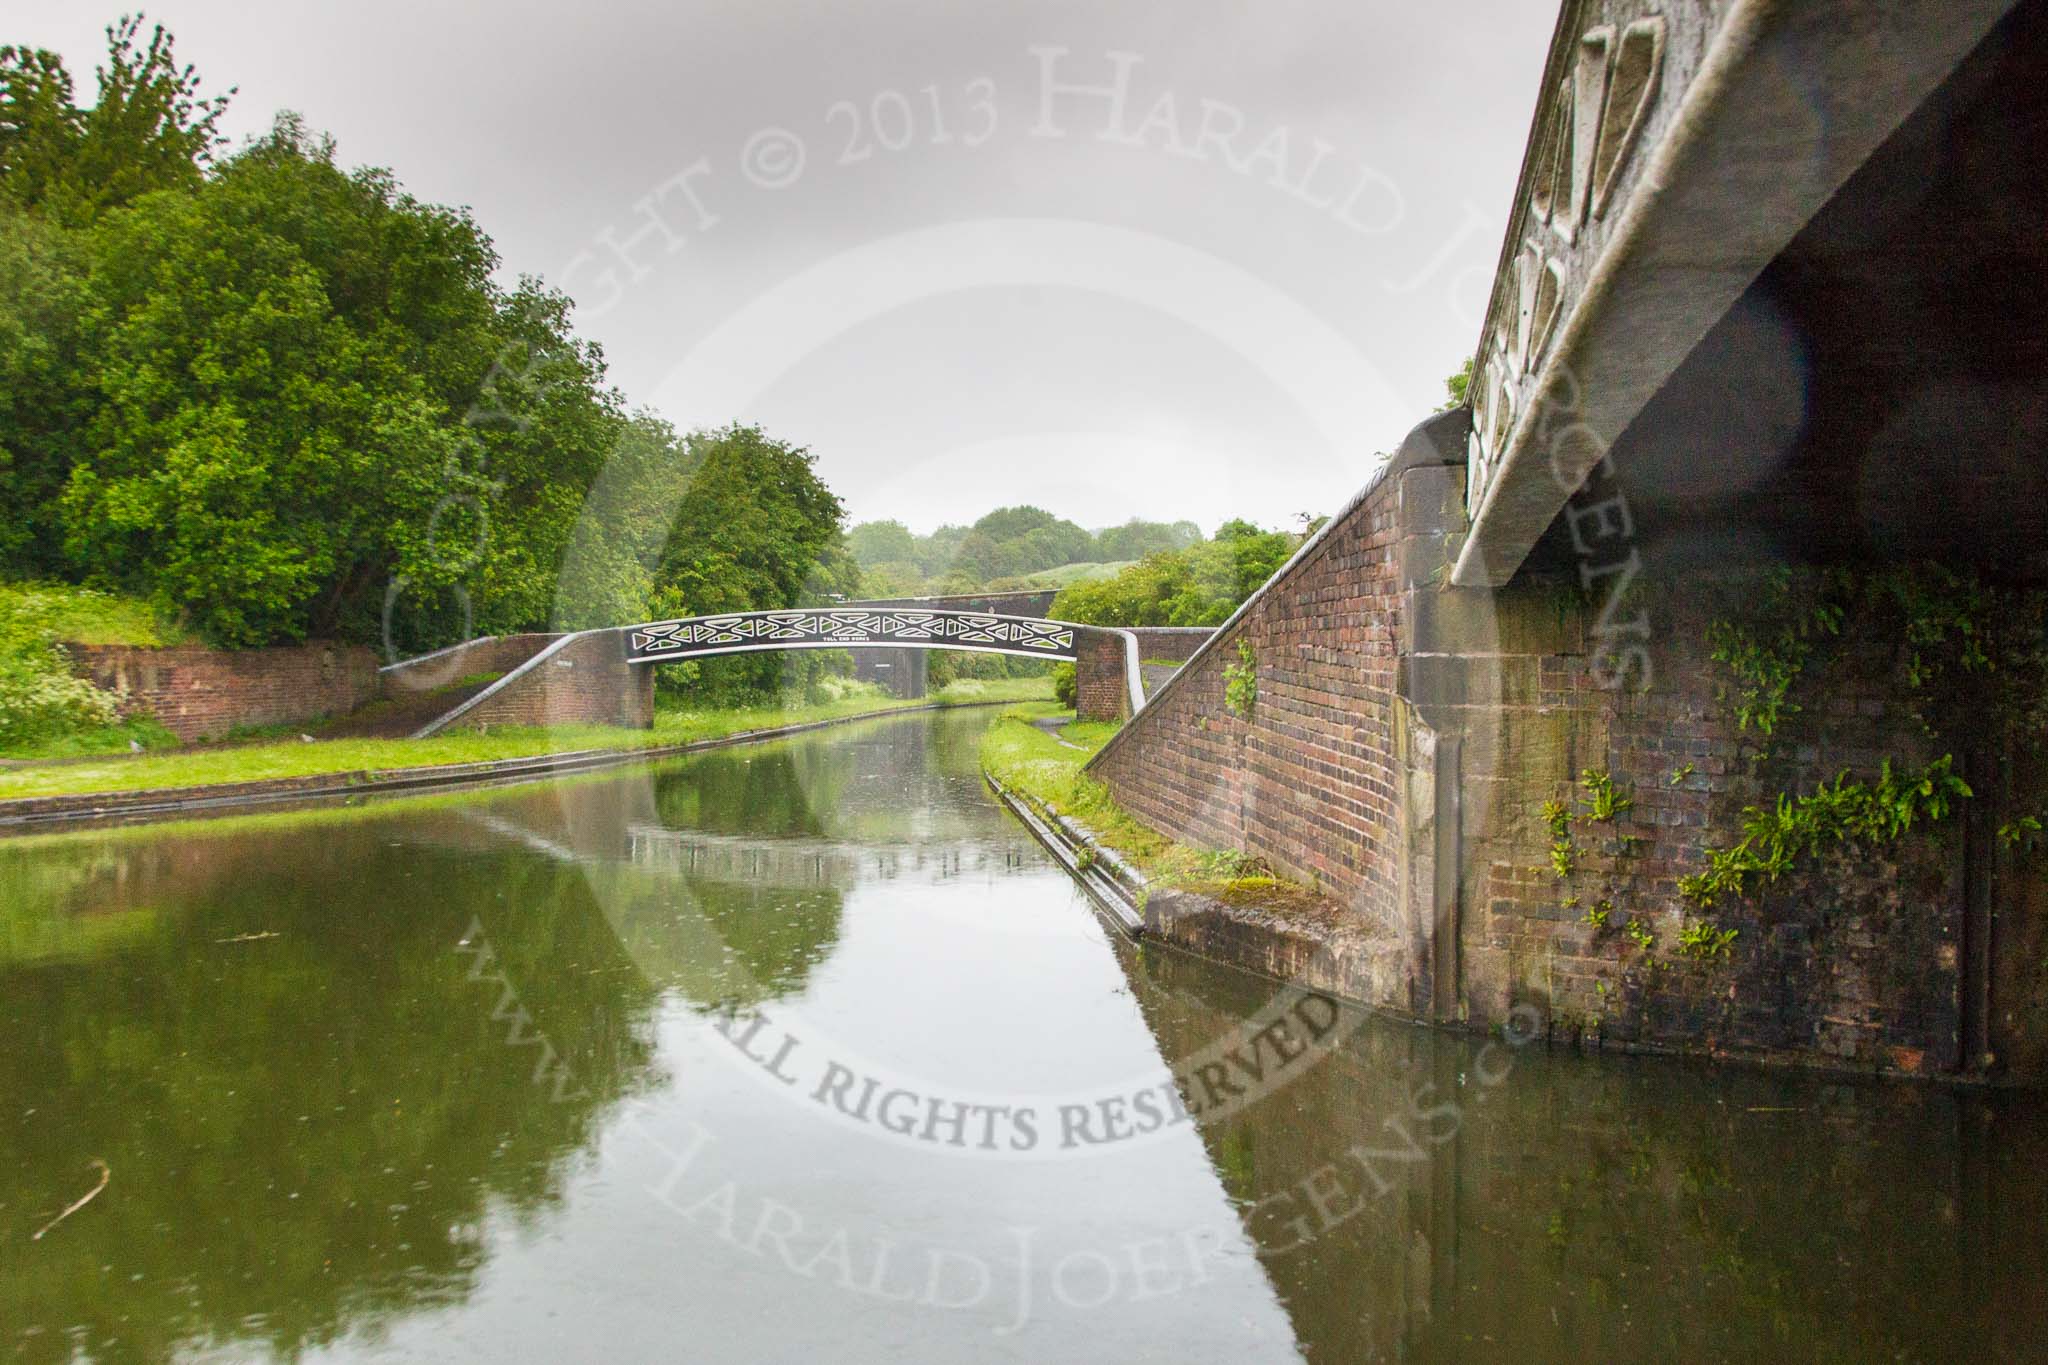 BCN Marathon Challenge 2014: Windmill End Junction, where the Dudley No 2 Canal meets the Dudley No 1 Canal, which leads in the photo, under the two bridges, to Netherton Tunnel.
Birmingham Canal Navigation,


United Kingdom,
on 25 May 2014 at 06:36, image #199